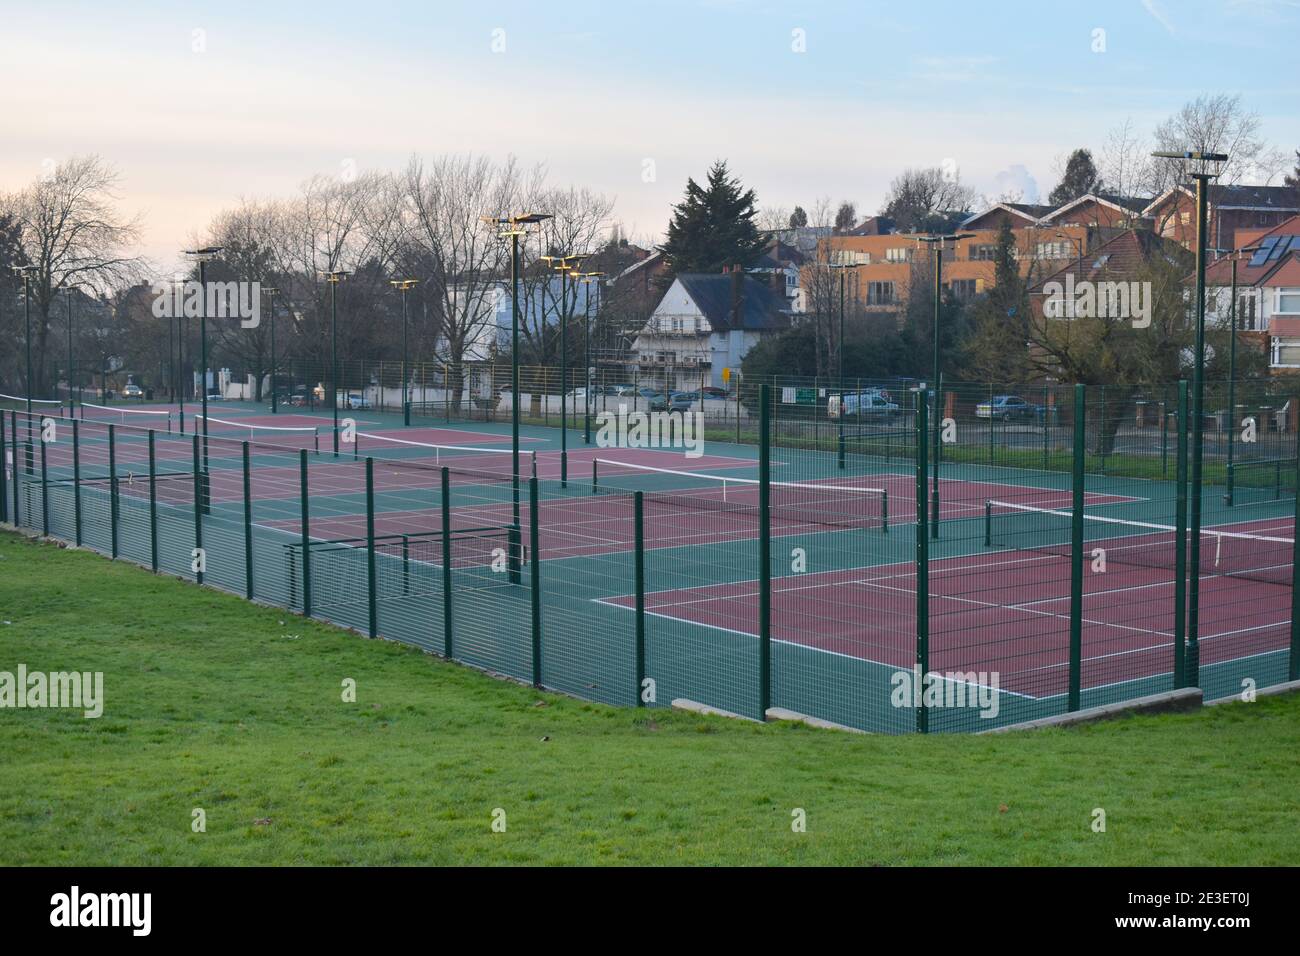 Macadam pay as you play tennis court open to the public Hard courts are made of uniform rigid material covered with acrylic for better bounce or speed Stock Photo